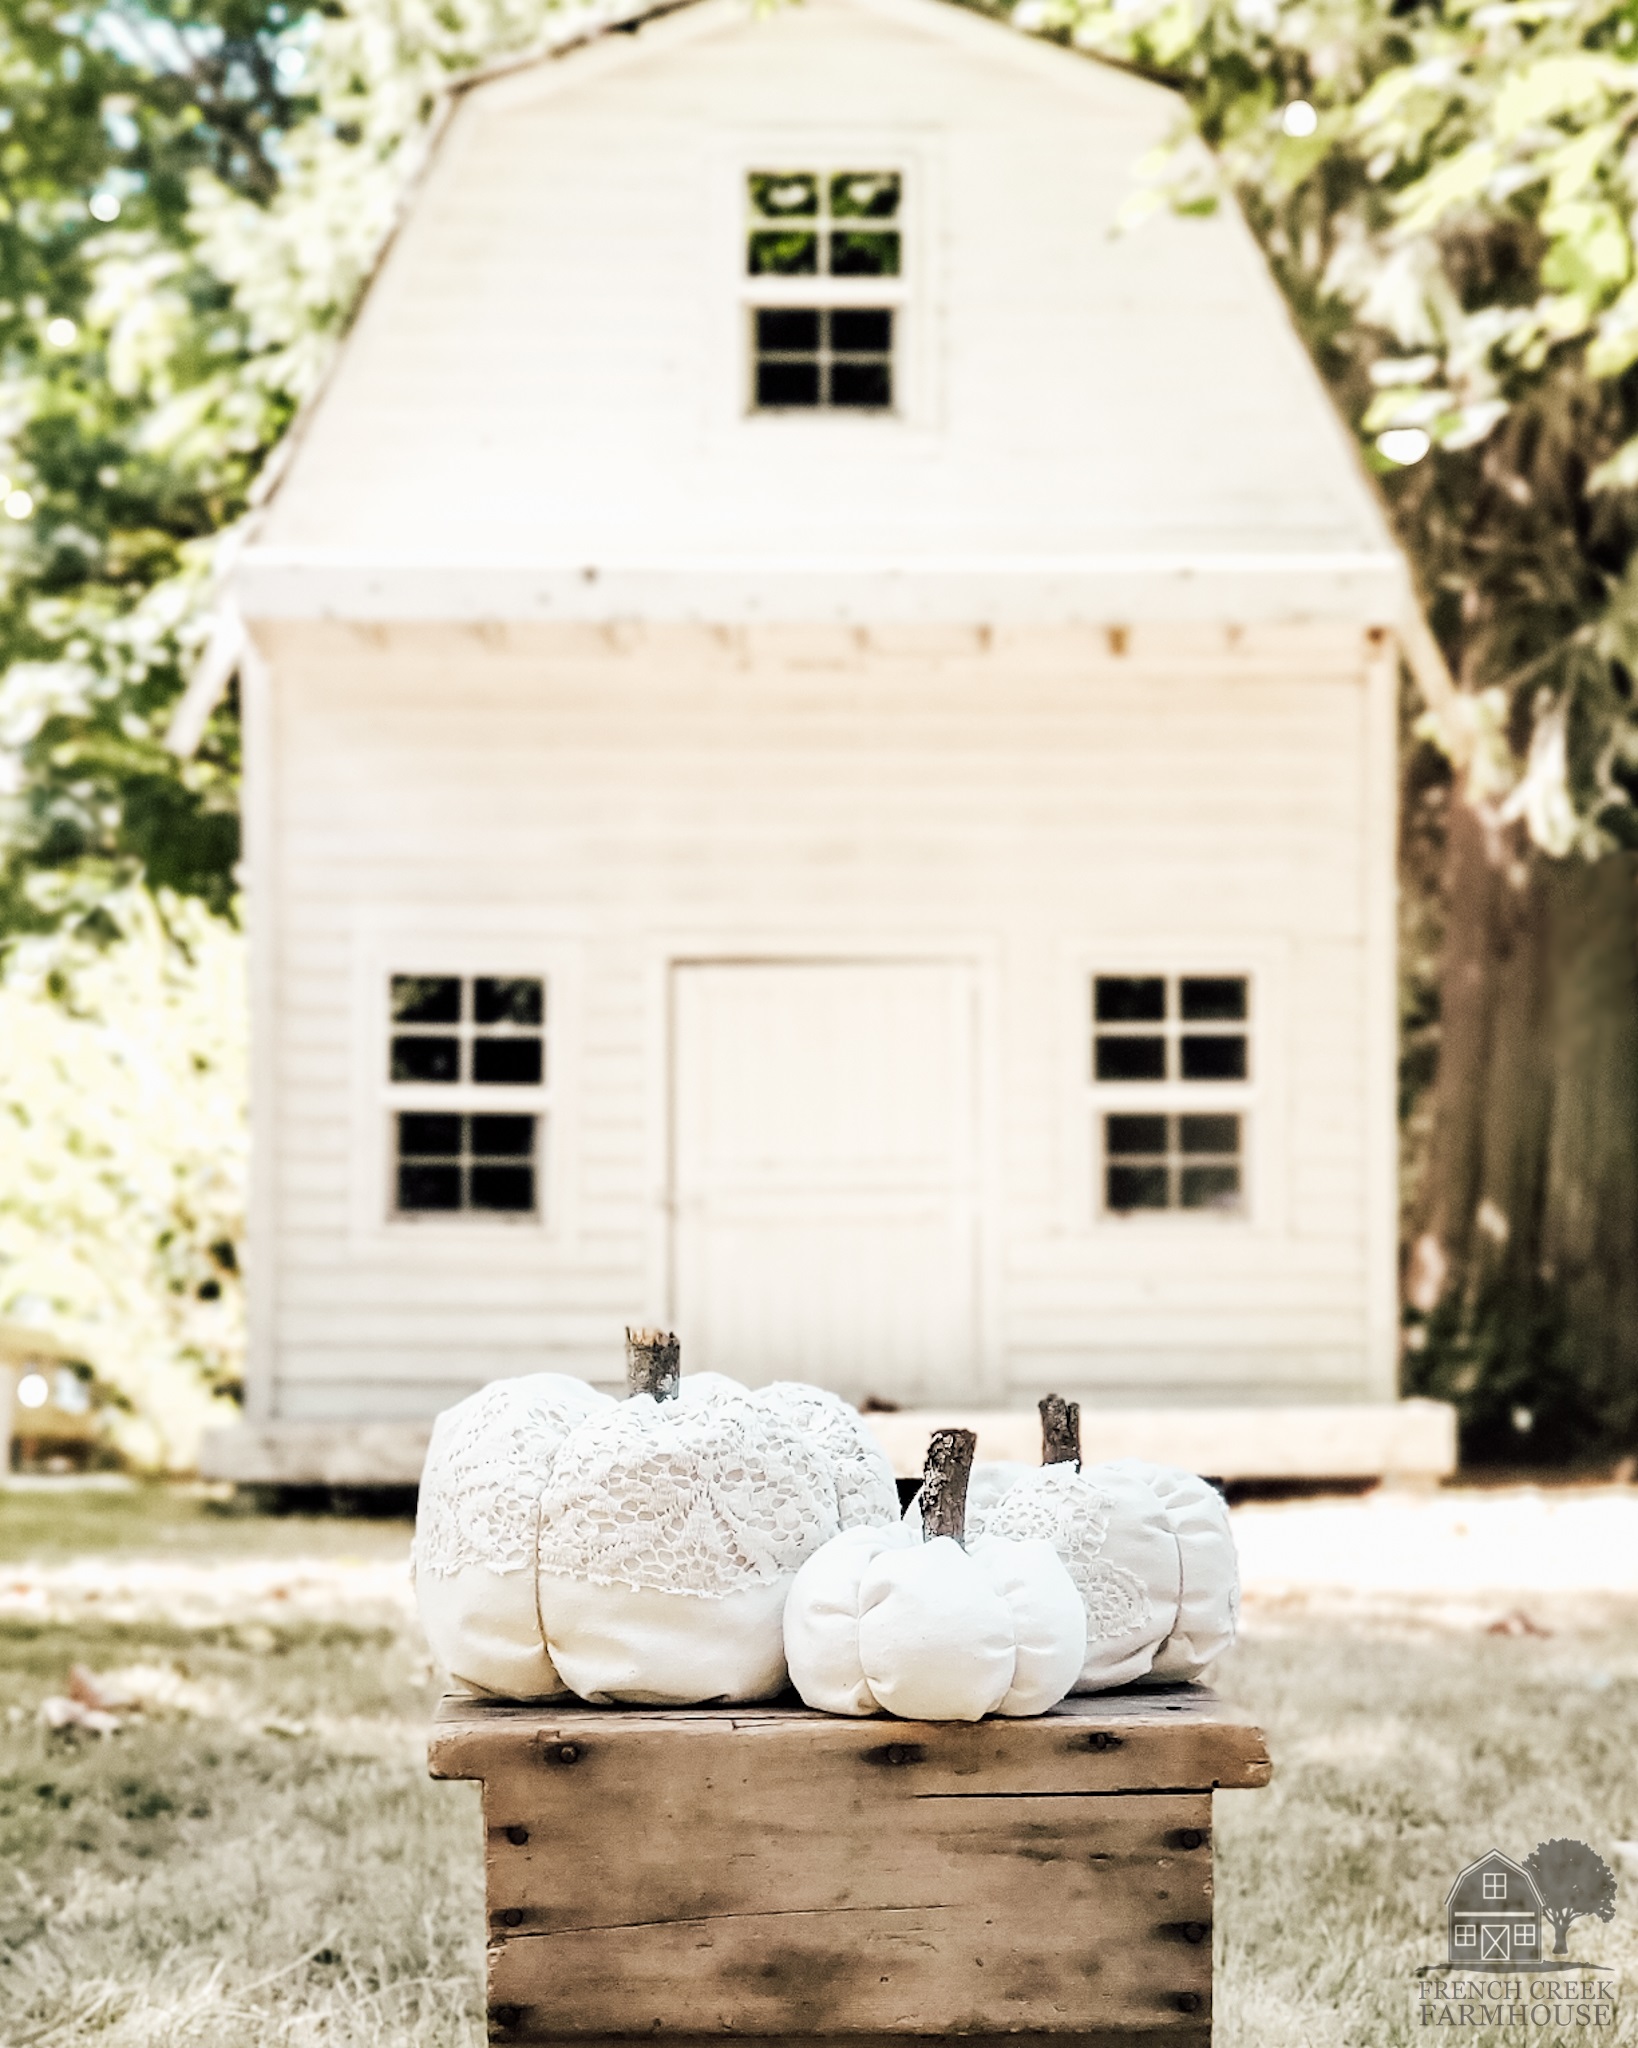 Rustic pumpkins in front of a white barn are the perfect symbol of autumn harvest